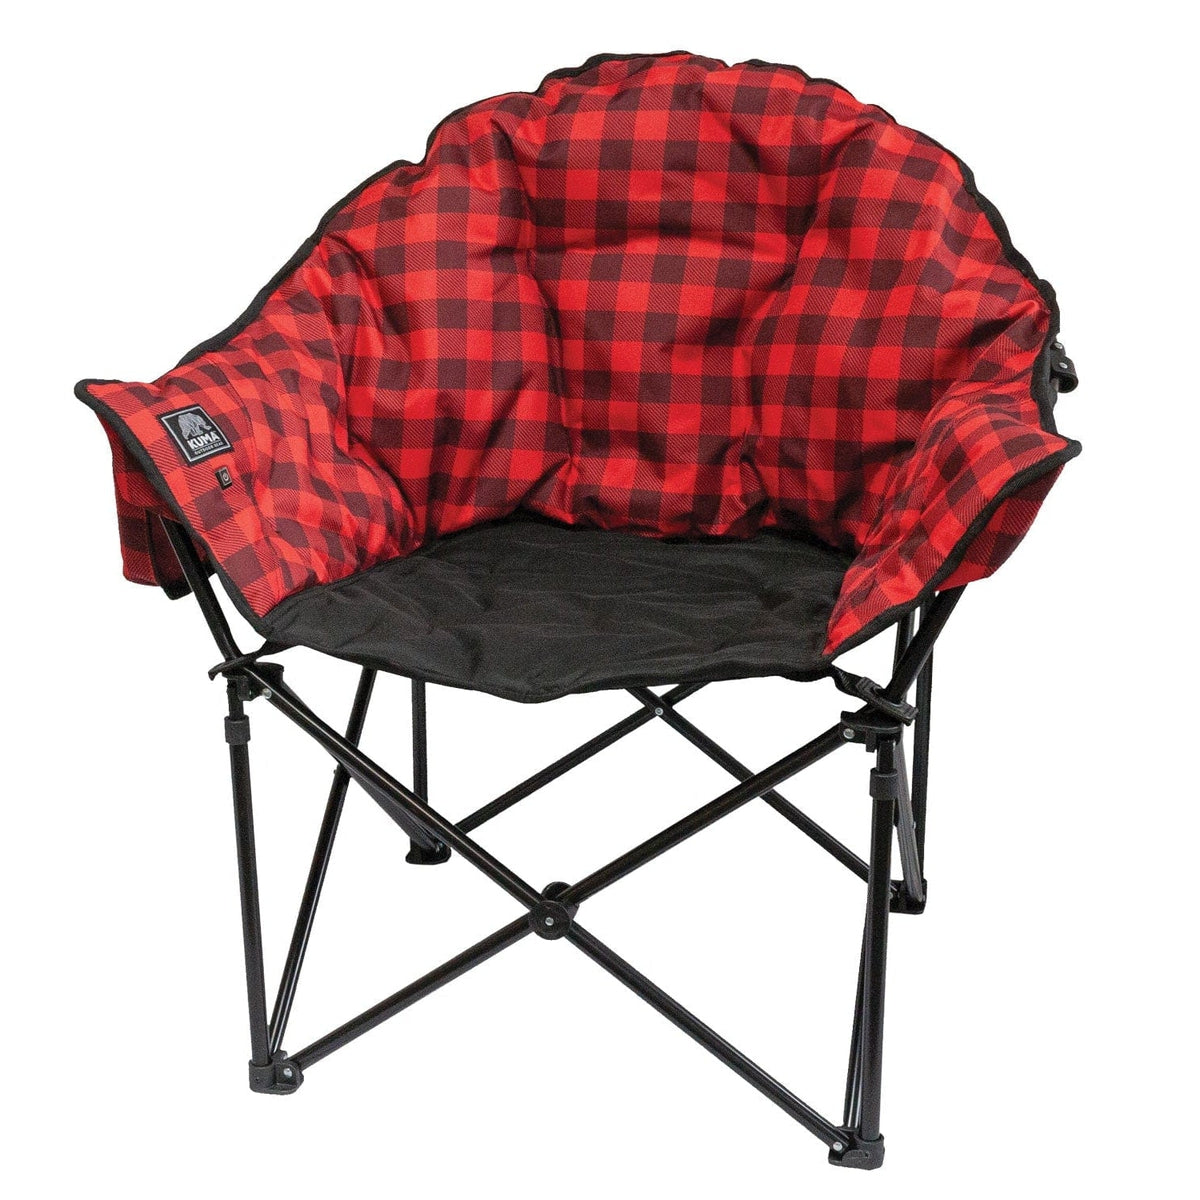 Kuma Outdoor Gear Not Qualified for Free Shipping Kuma Outdoor Gear Heated Lazy Bear Chair with 10,000 mAh Power Bank Red Plaid #KM-LBHCH-RB